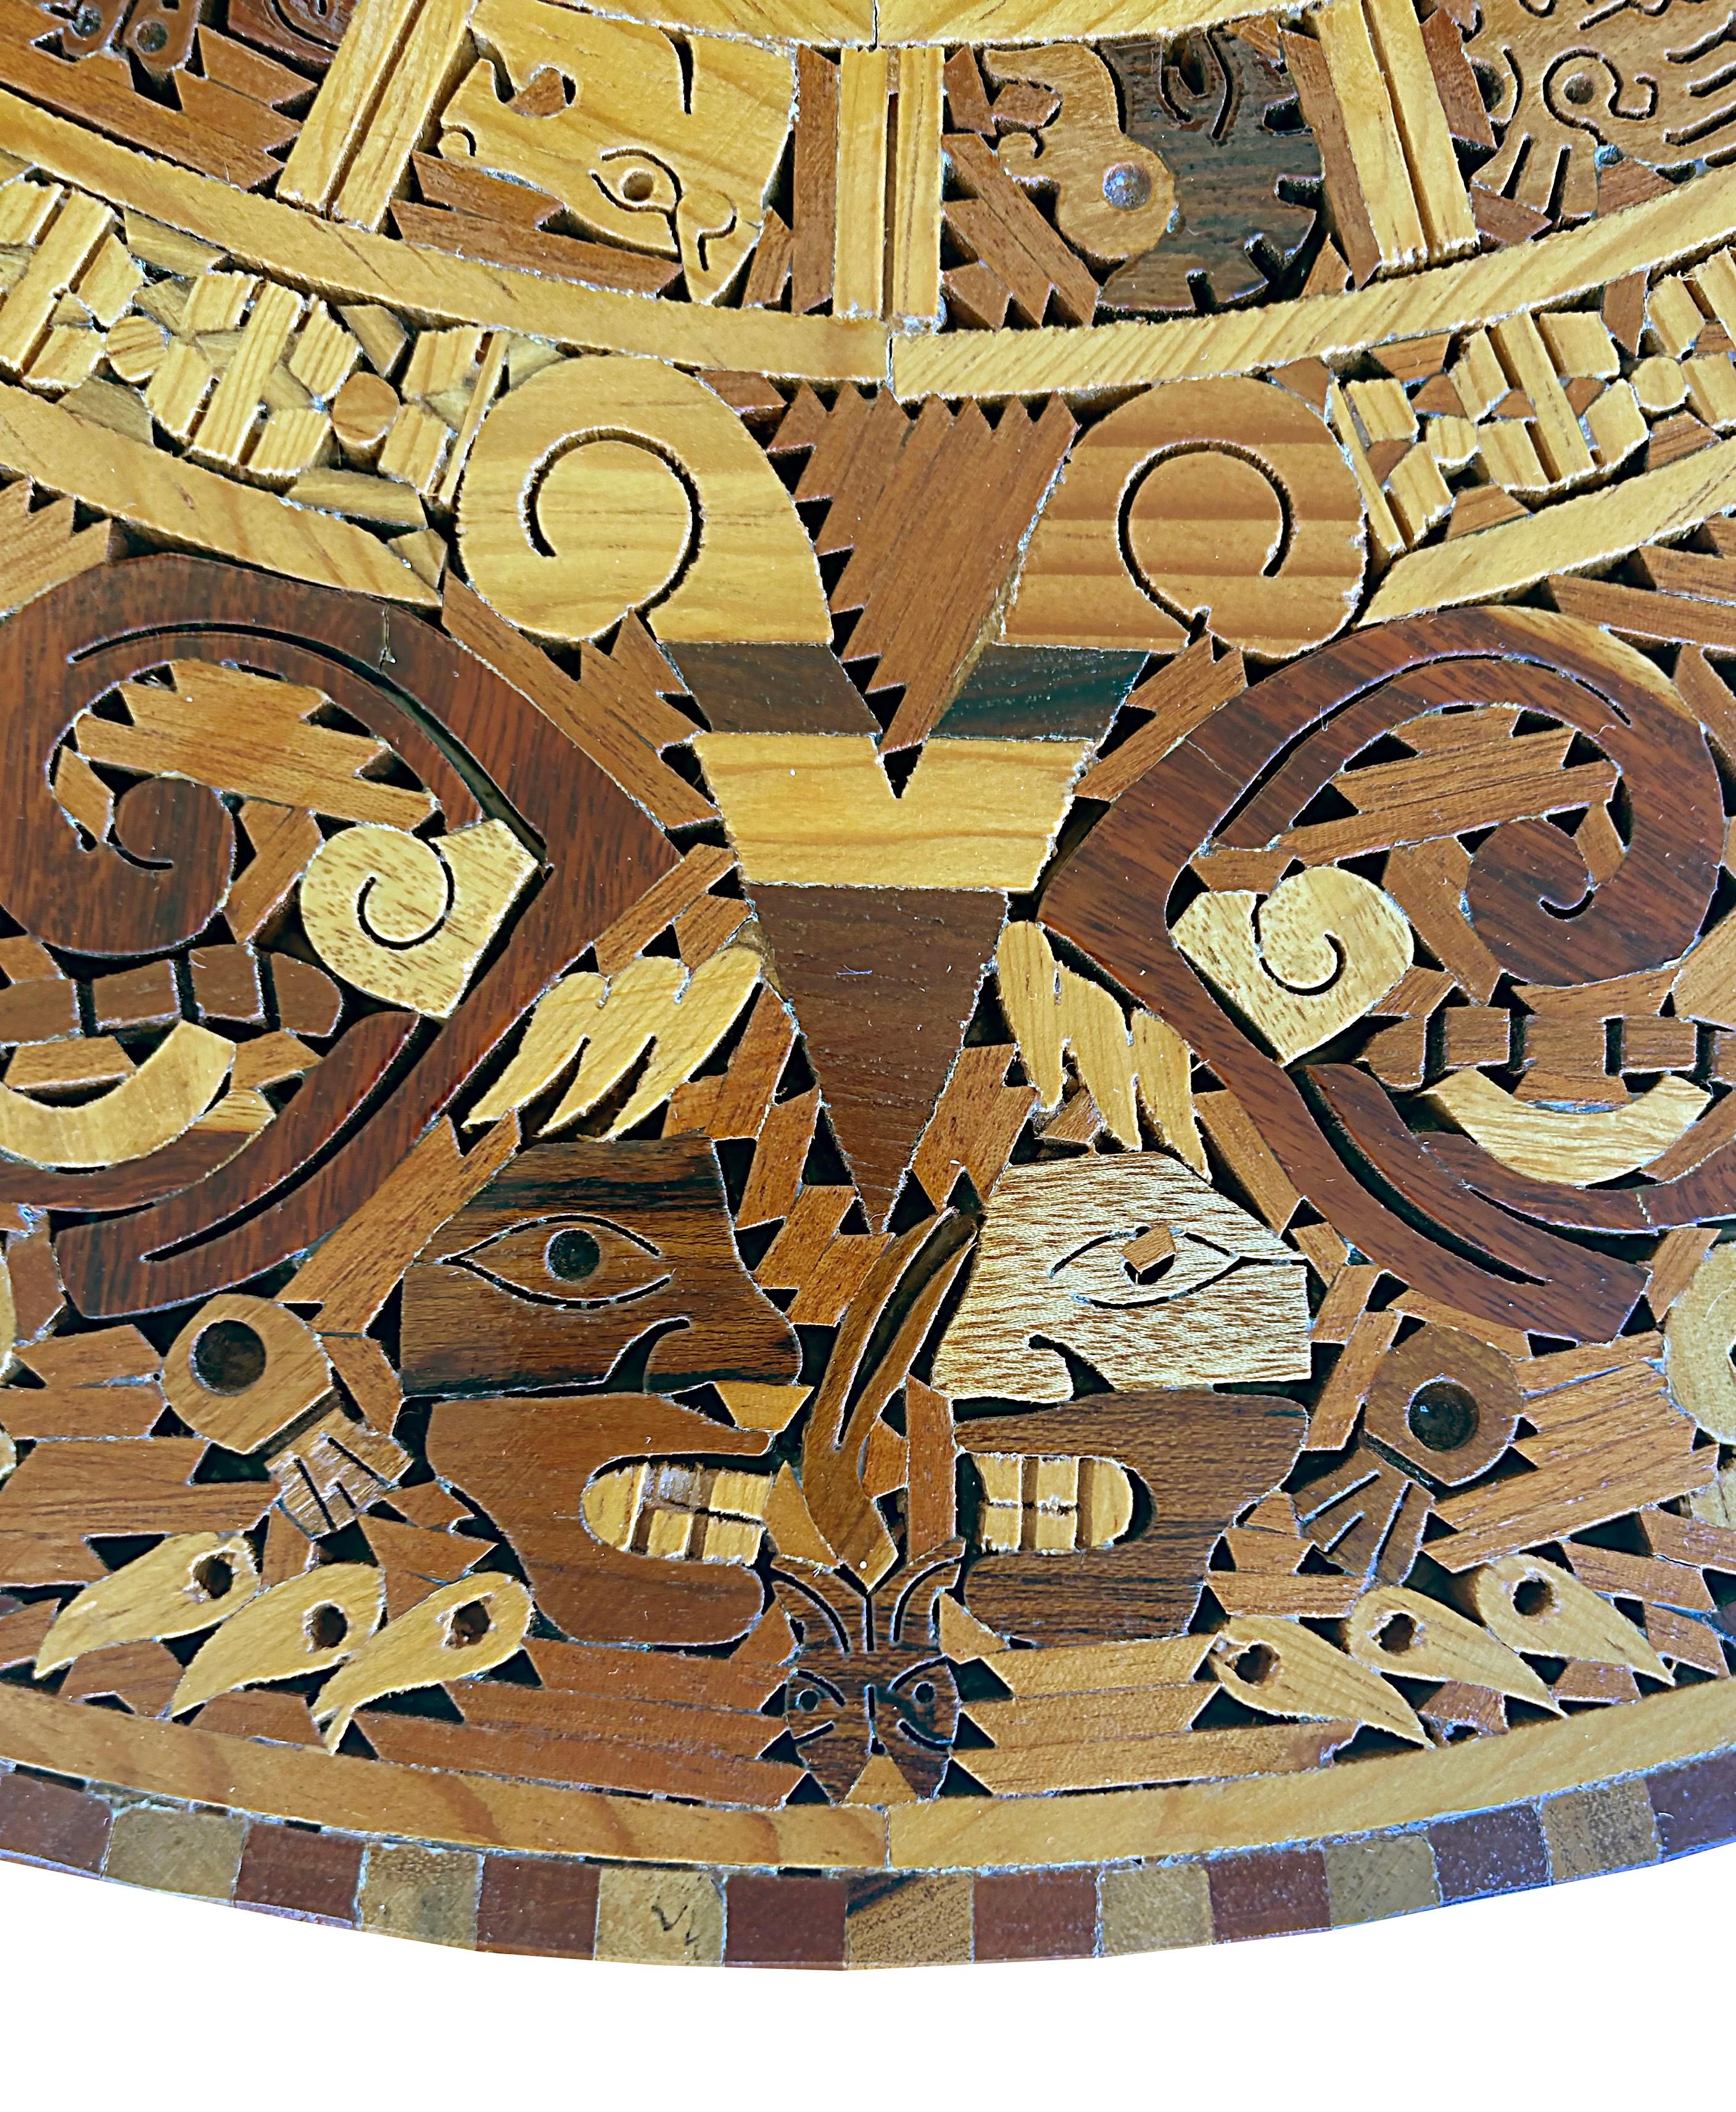 Mosaic Handmade Mexican Exotic Wood Aztec Calendar Wall Sculpture- Only One Available For Sale